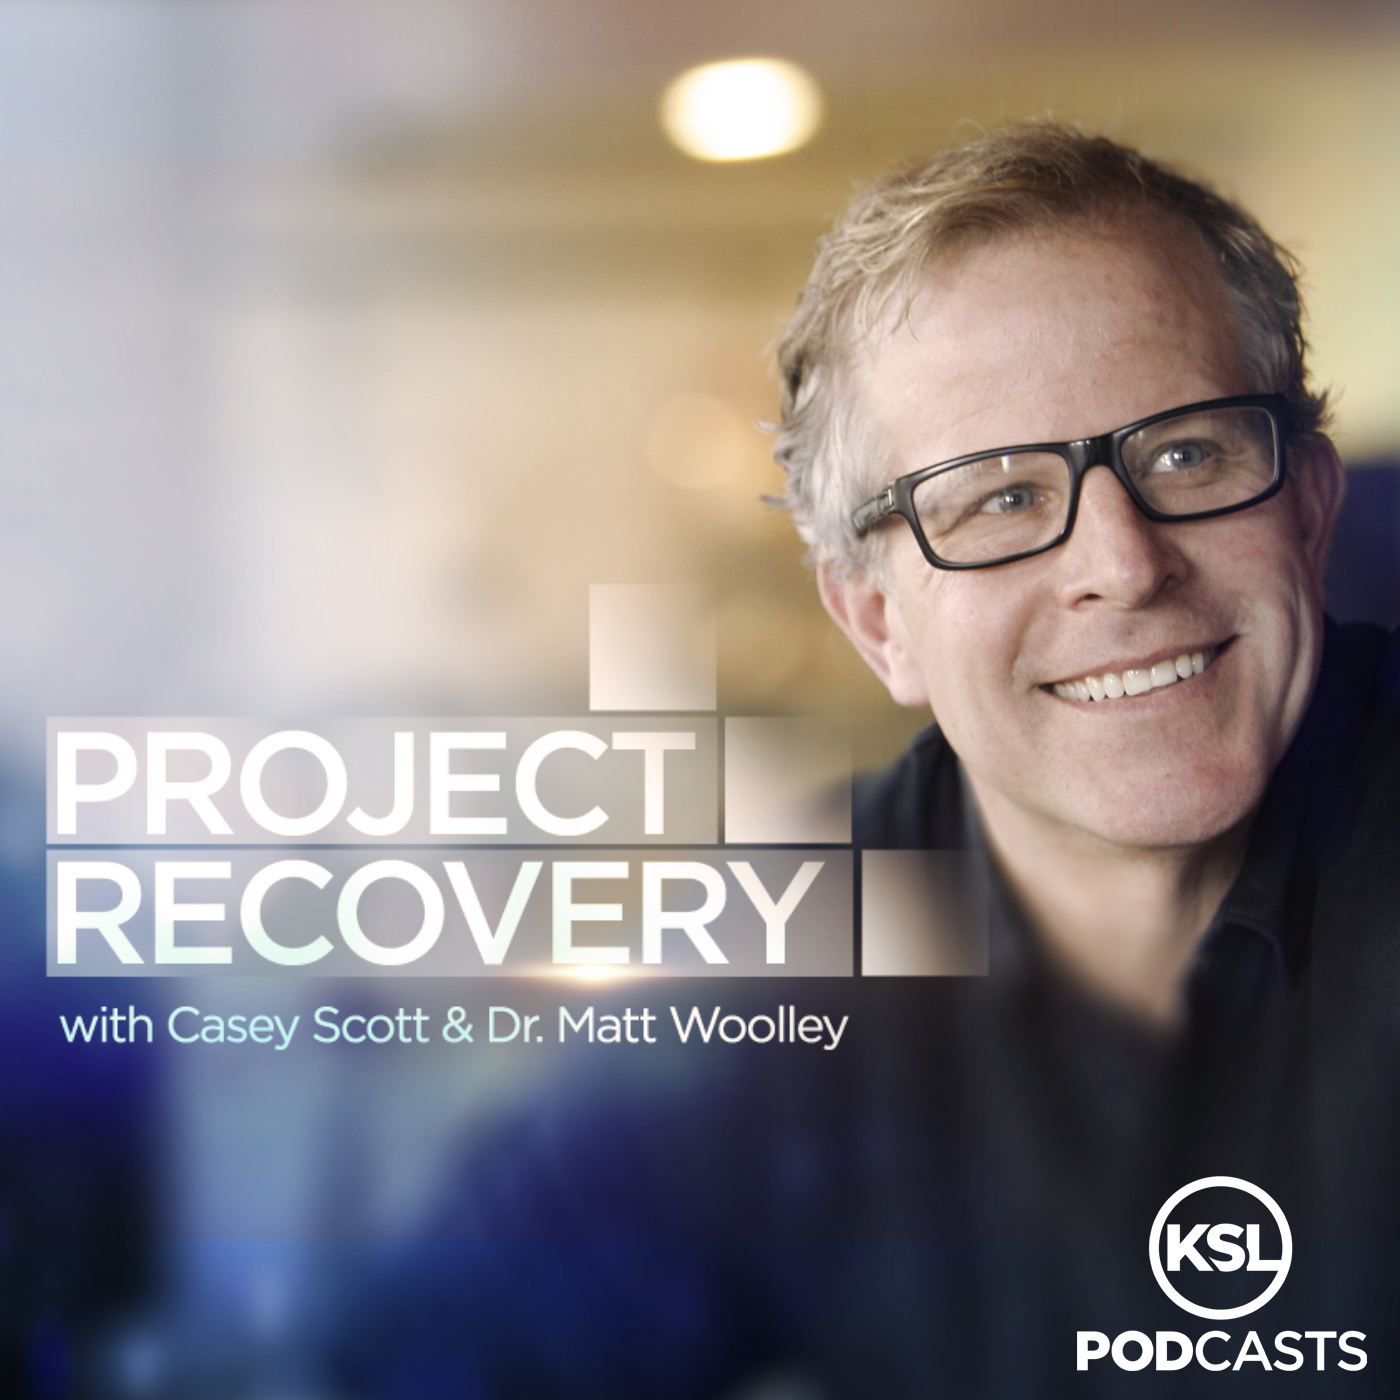 Todd Smith talks about choosing addiction over every other aspect of life